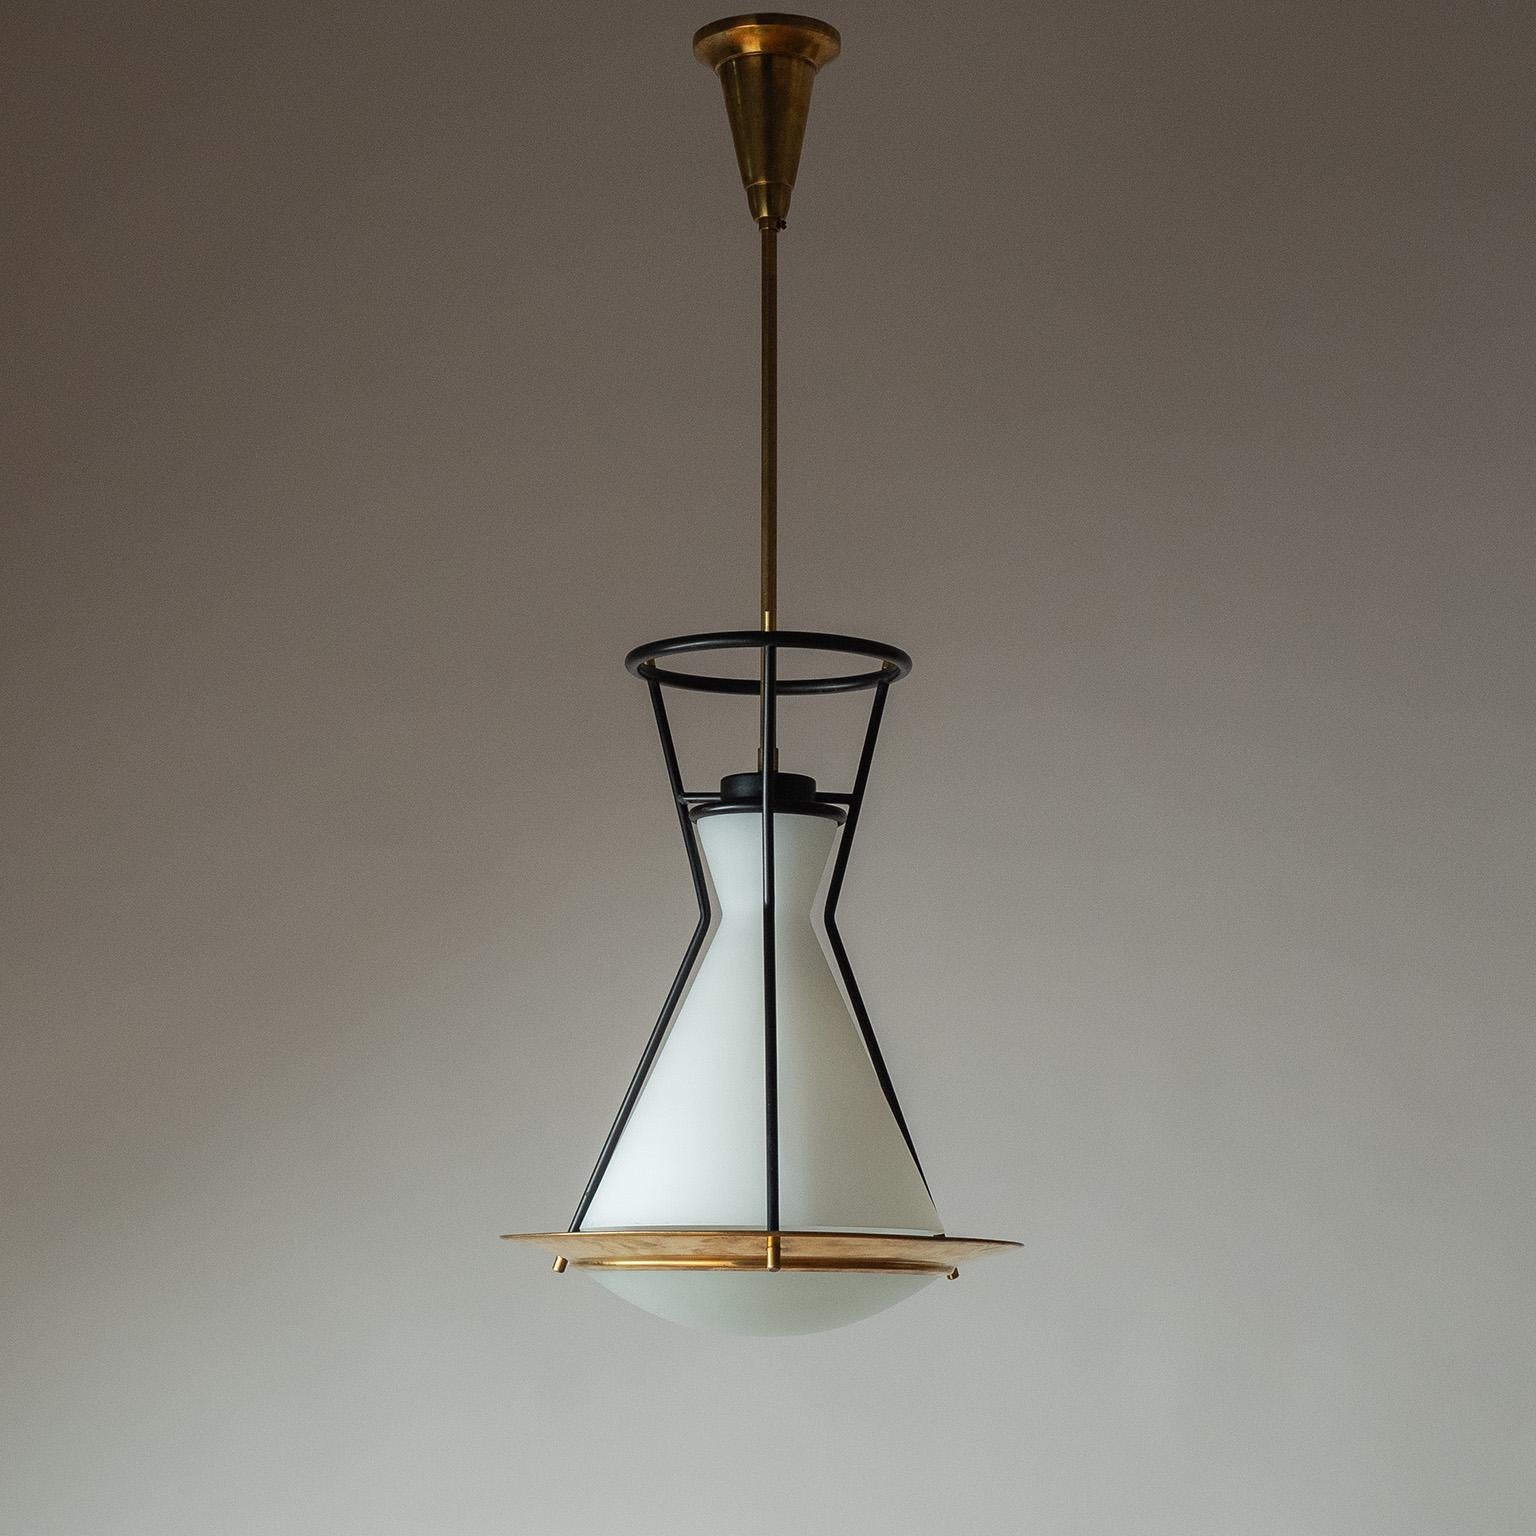 Modernist Italian pendant from the 1950s, attributed to Bruno Chiarini. Geometric brass and lacquered steel frame with a large conical satin glass diffuser. Attached underneath is a large brass frame with a curved and textured glass disc. Heavy